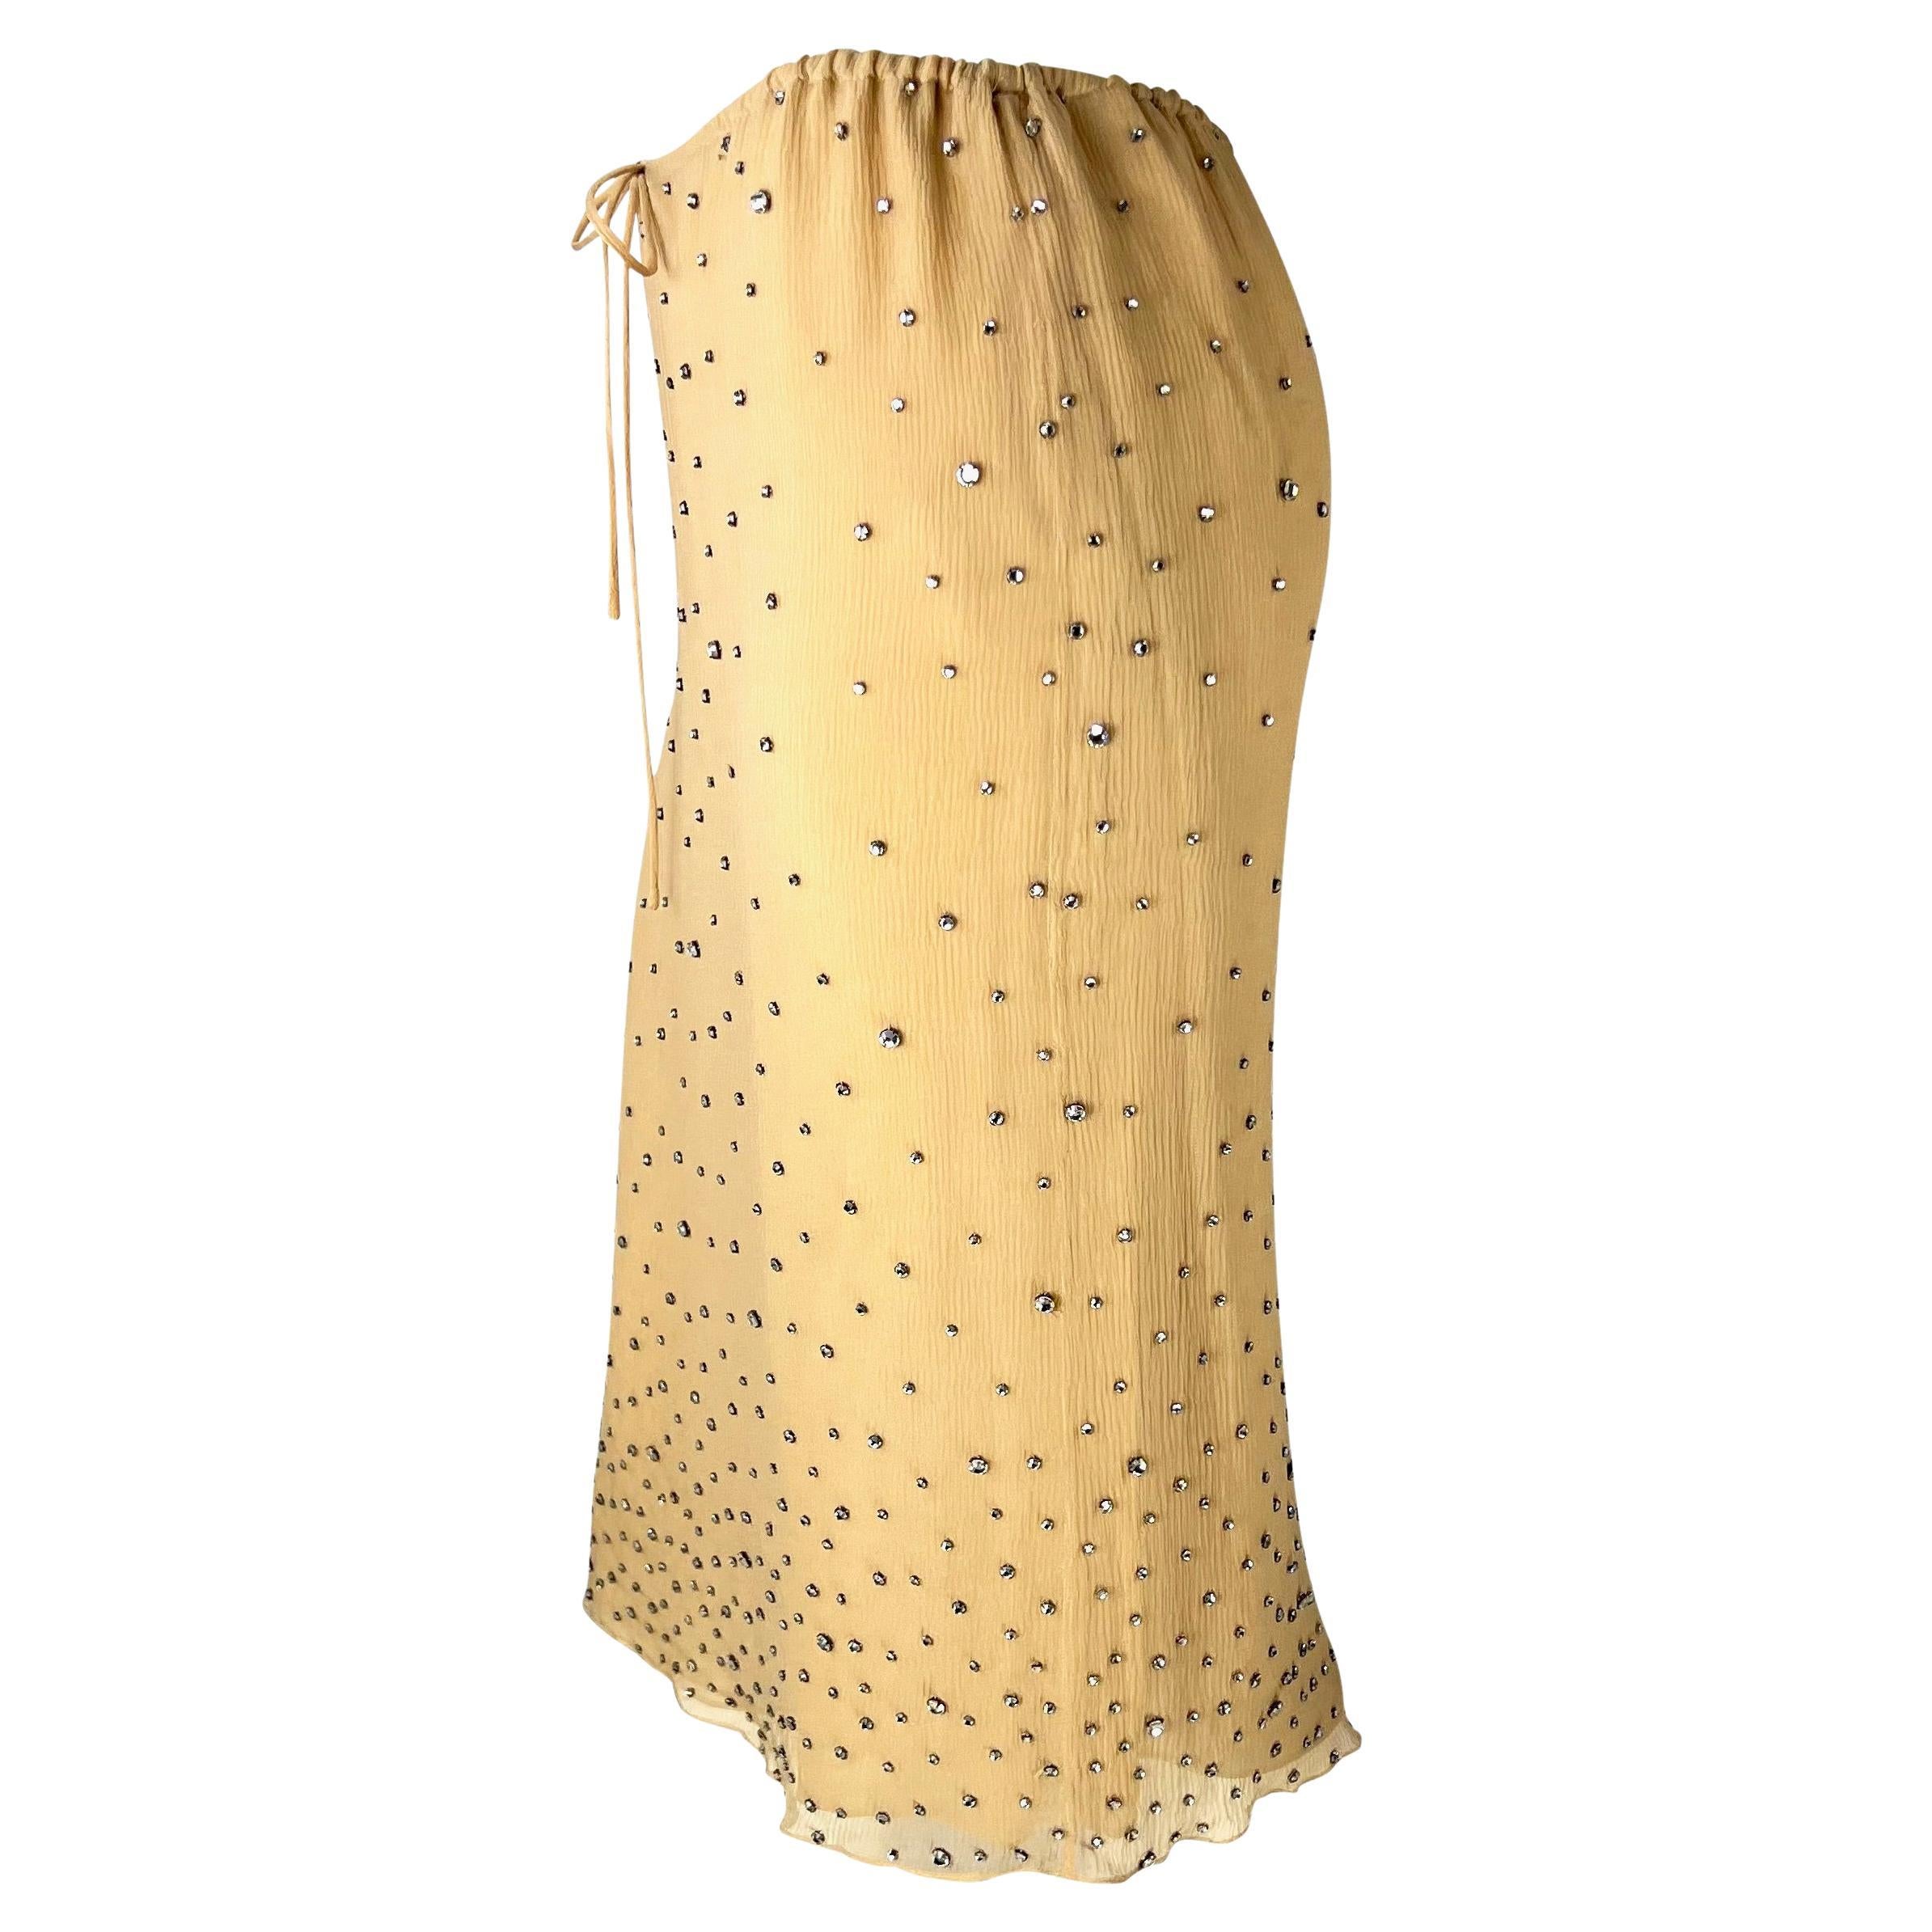 TheRealList presents: an incredible and rare beige silk Gucci skirt, designed by Tom Ford. From the Spring/Summer 2000 collection, this stunning beige silk shirt is covered in clear rhinestones of varying sizes. Incredibly rare and virtually never